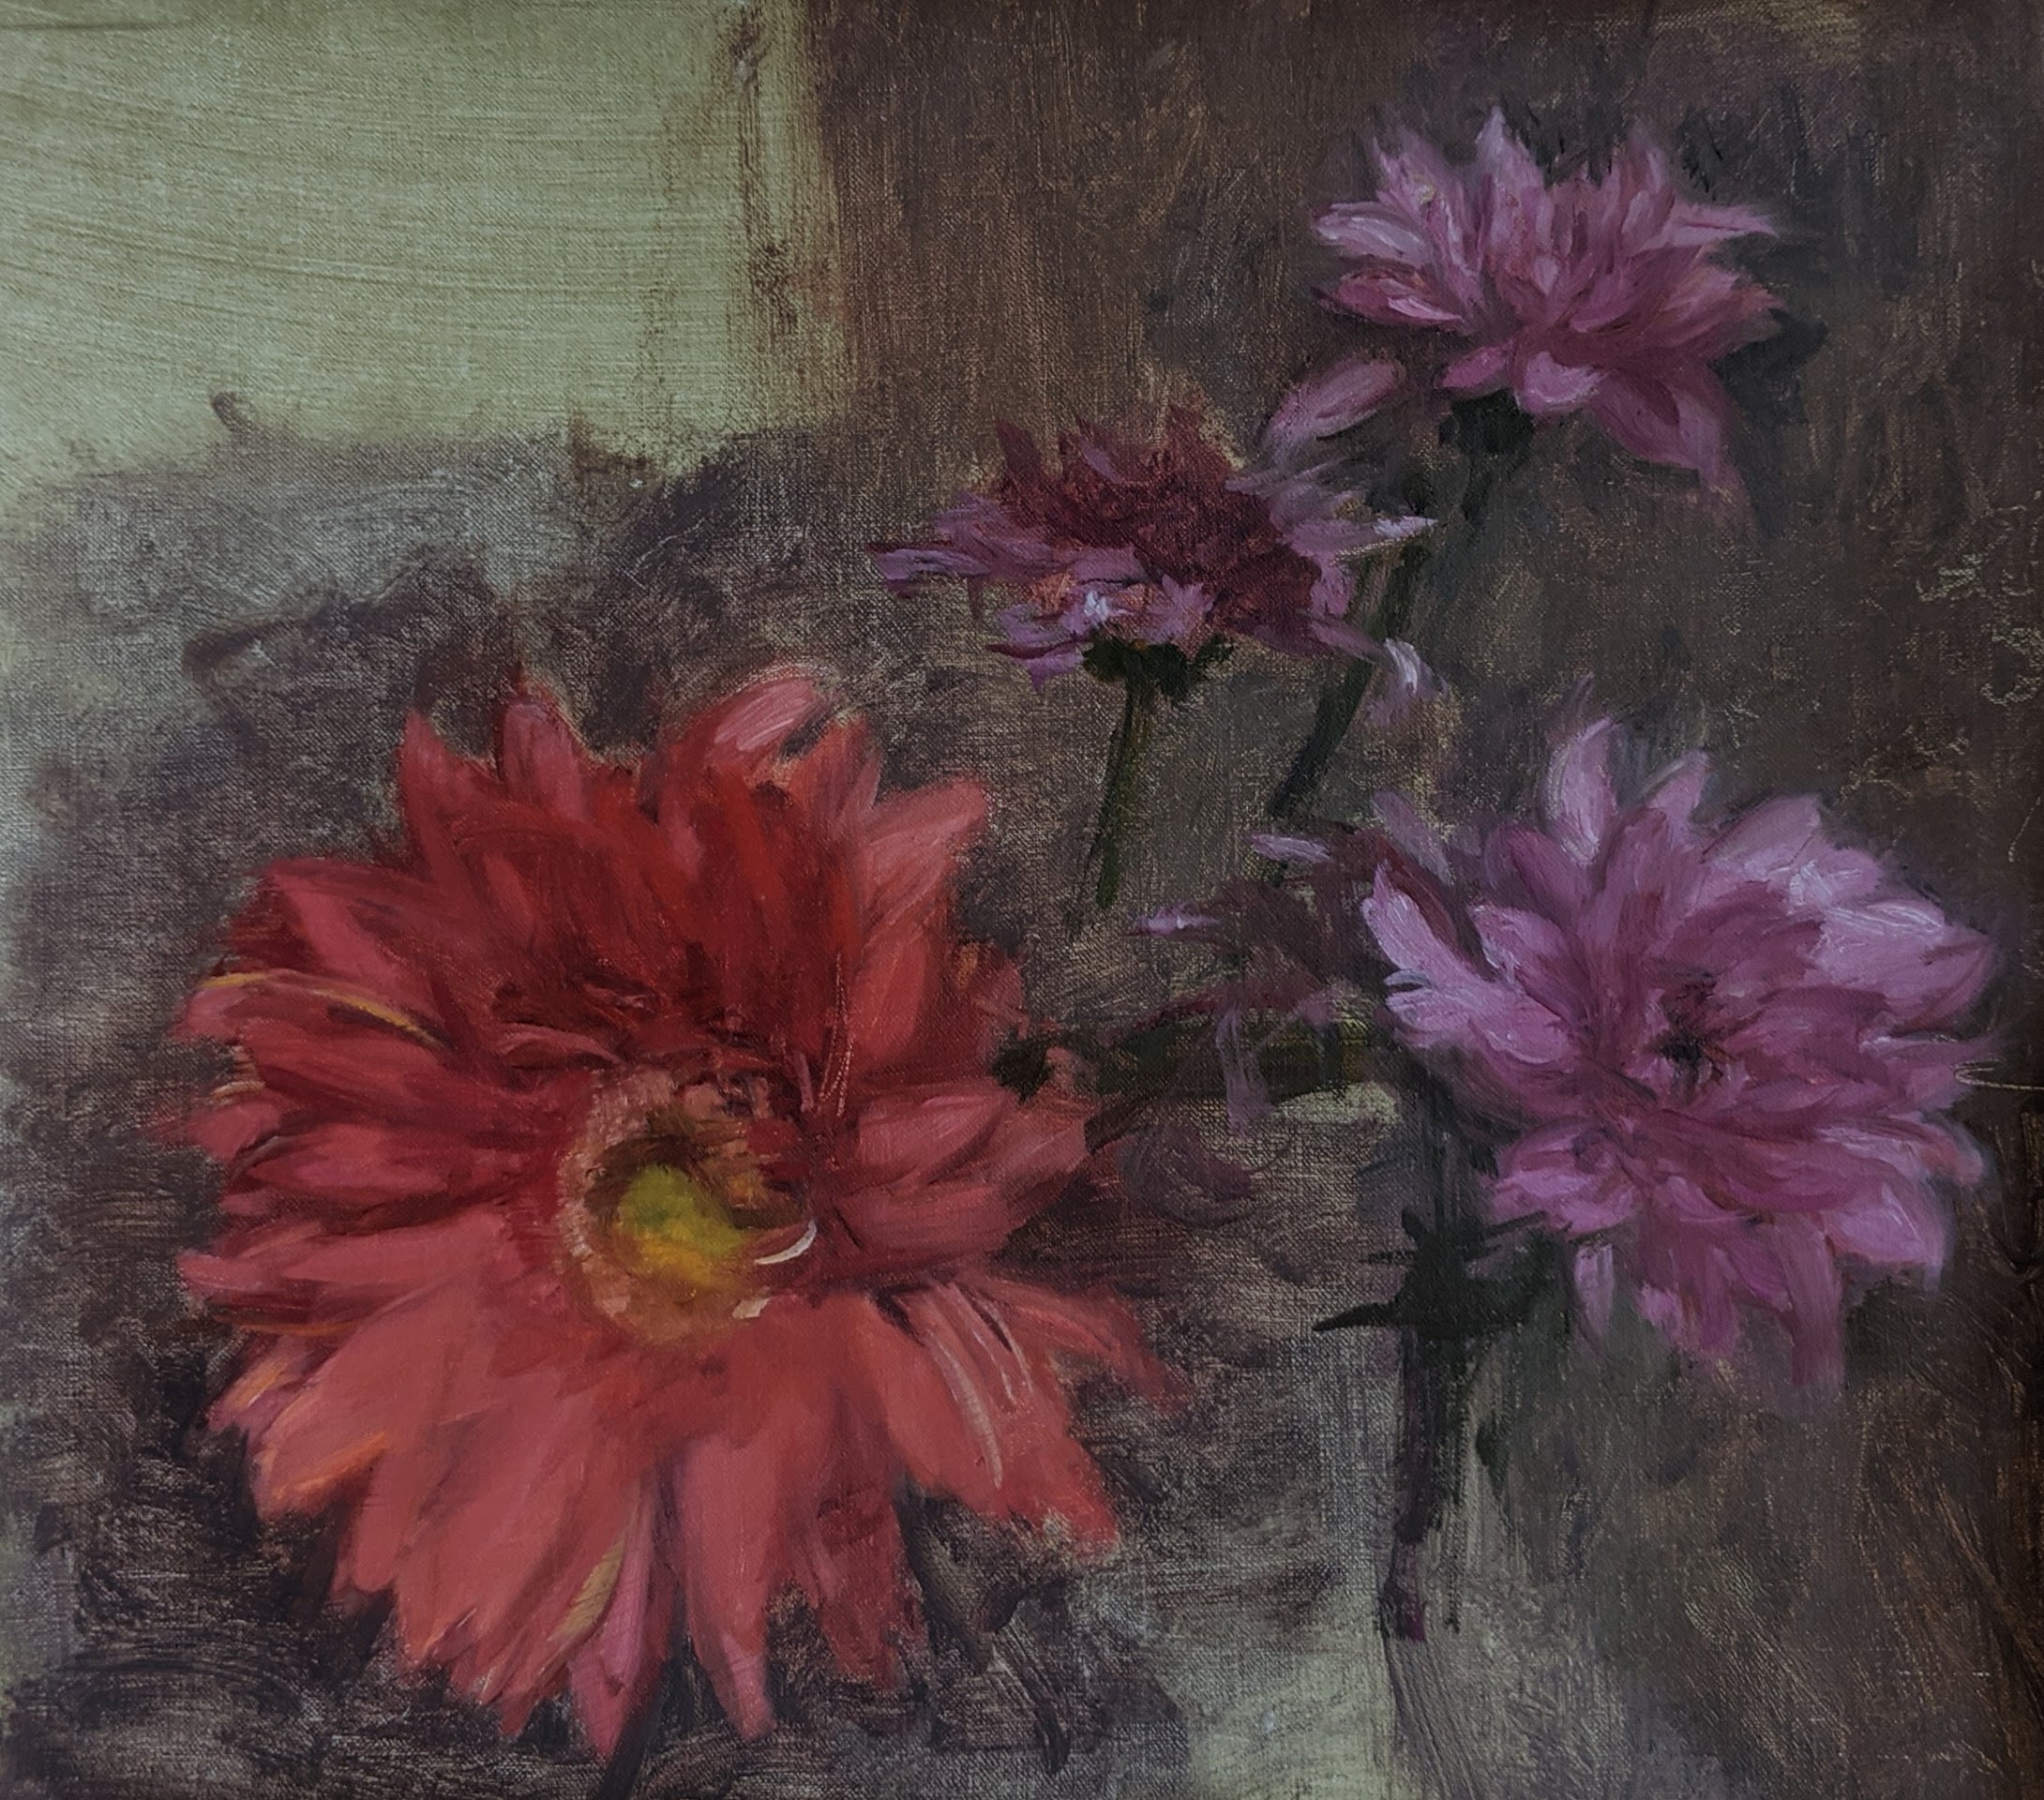 Study of Gerber Daisy and Mums